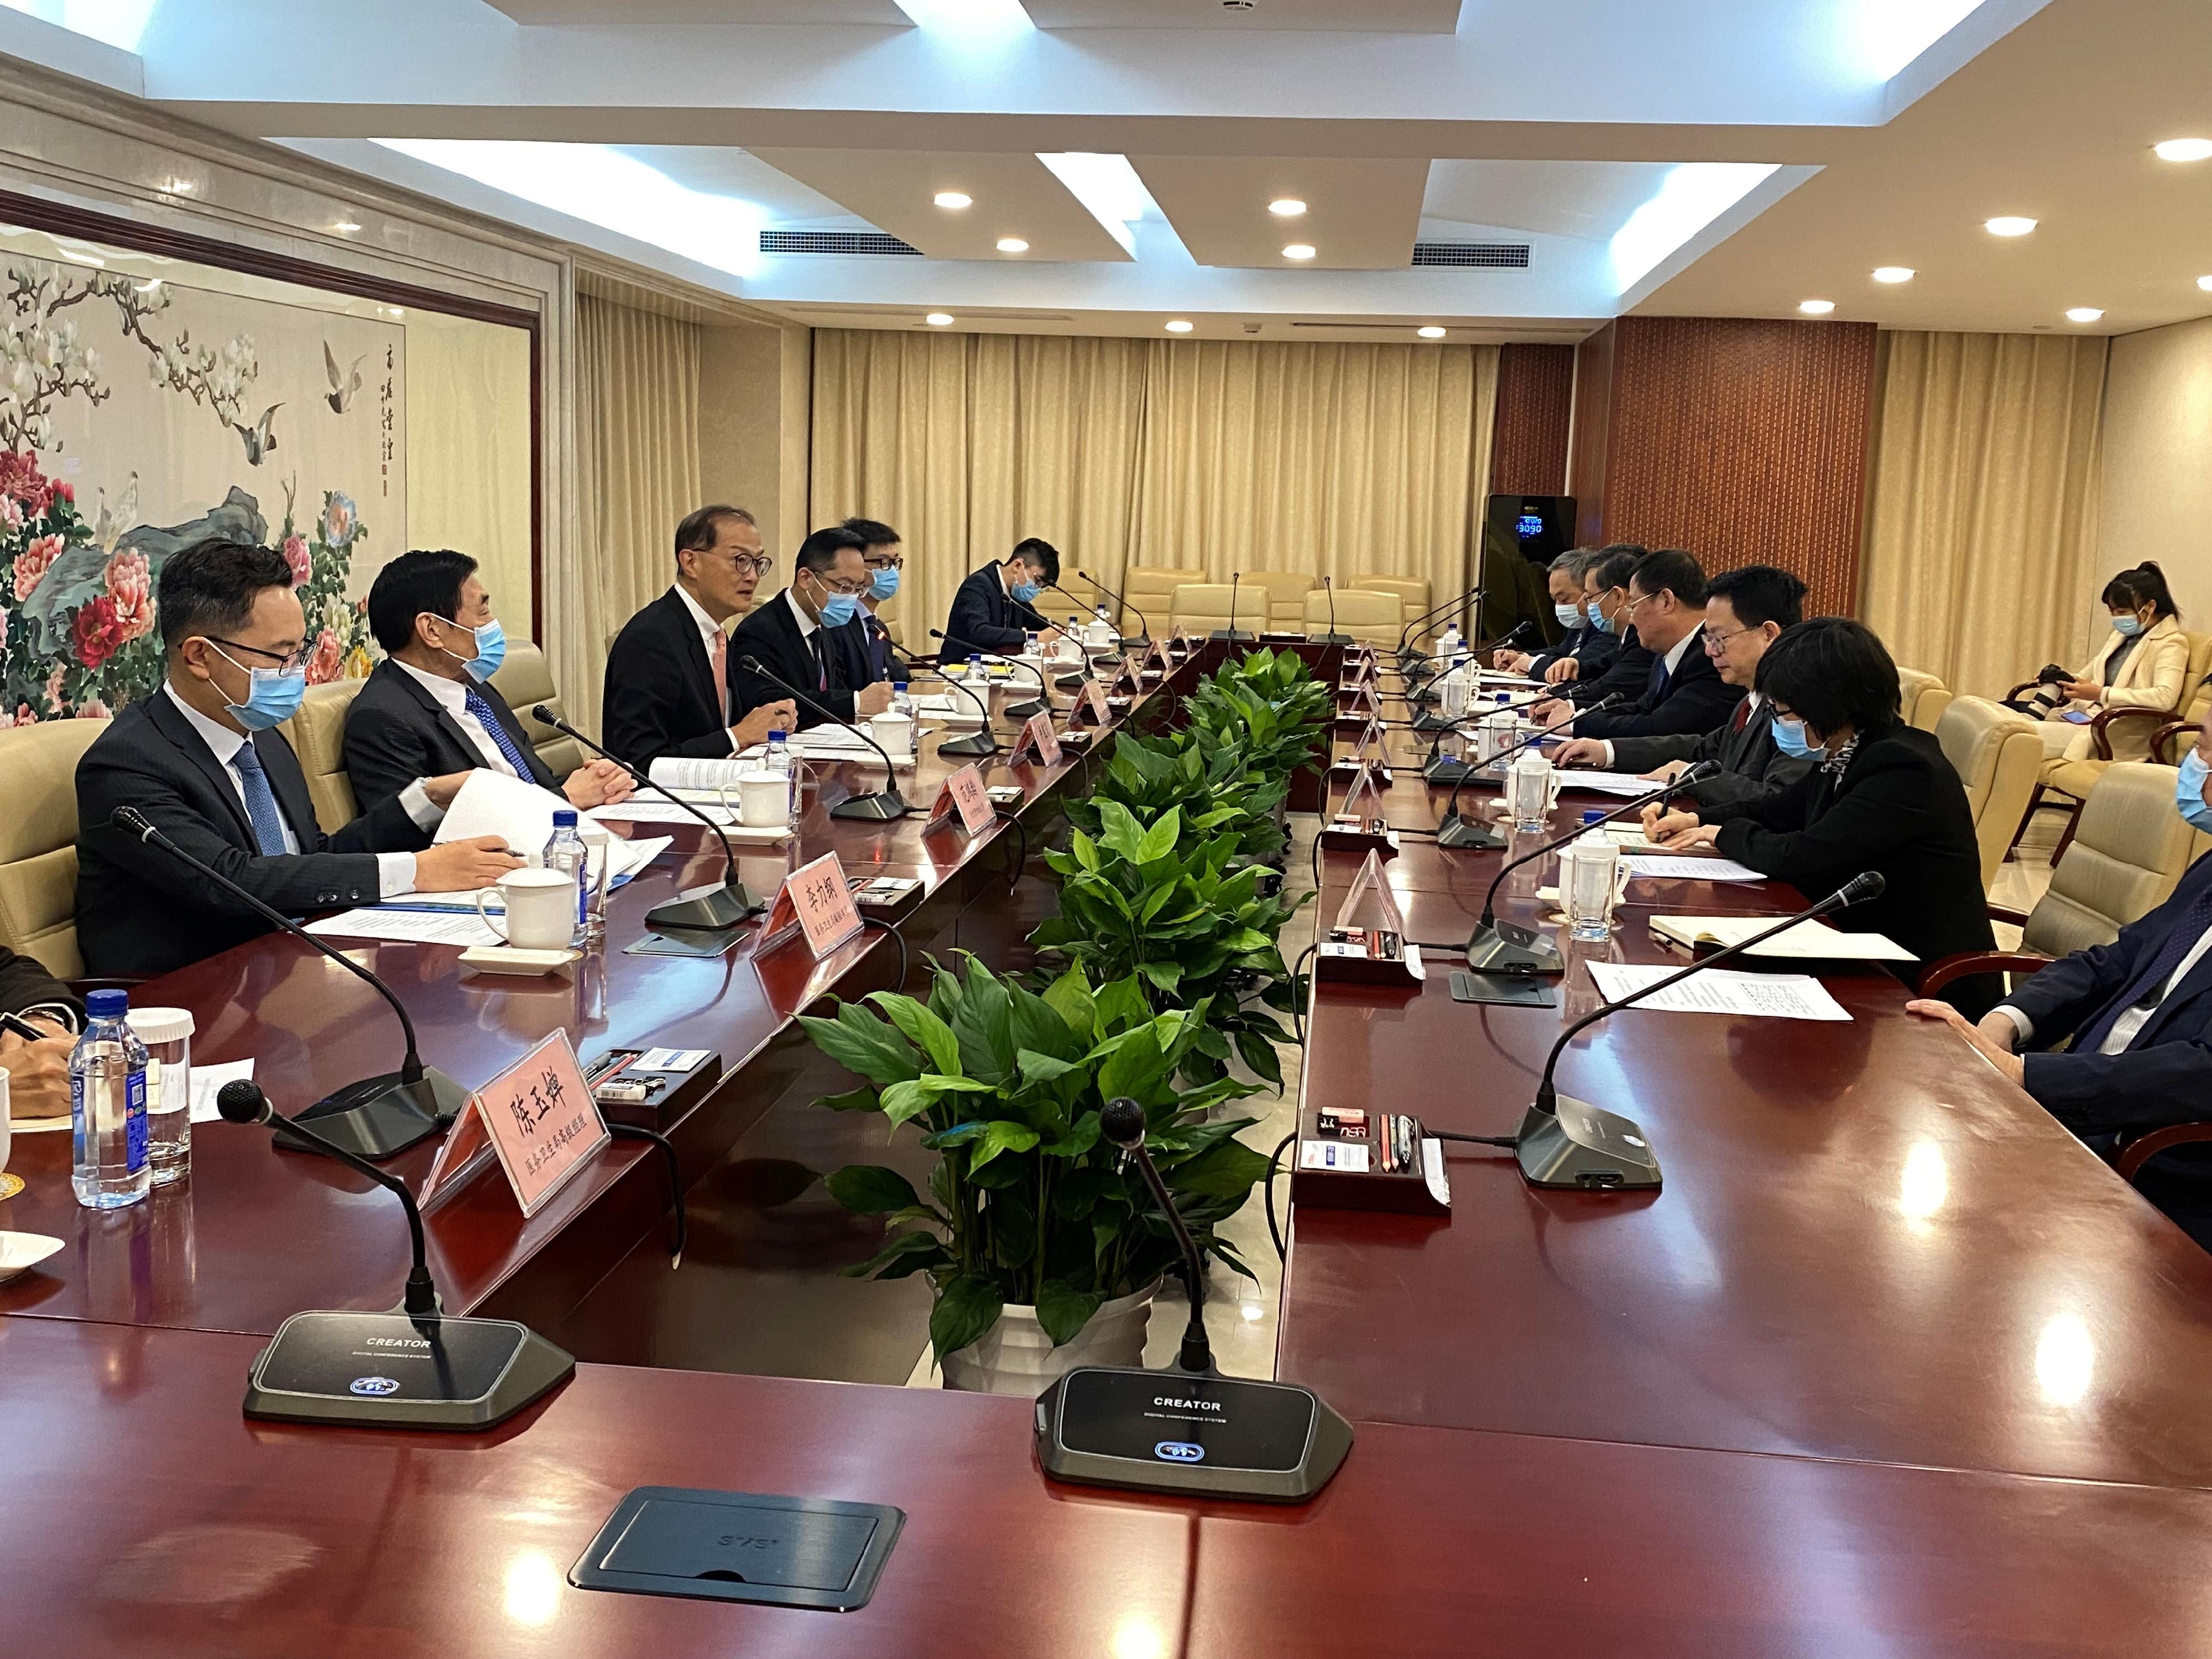 The Secretary for Health, Professor Lo Chung-mau, and his delegation visited the National Medical Products Administration (NMPA) today (March 17). Photo shows Professor Lo (third left) in a meeting with NMPA Deputy Commissioner Mr Zhao Junning (third right), with the Director of Health, Dr Ronald Lam (fourth left); Deputy Secretary for Health Mr Eddie Lee (first left); and the Chairman of the Hospital Authority, Mr Henry Fan (second left), in attendance.